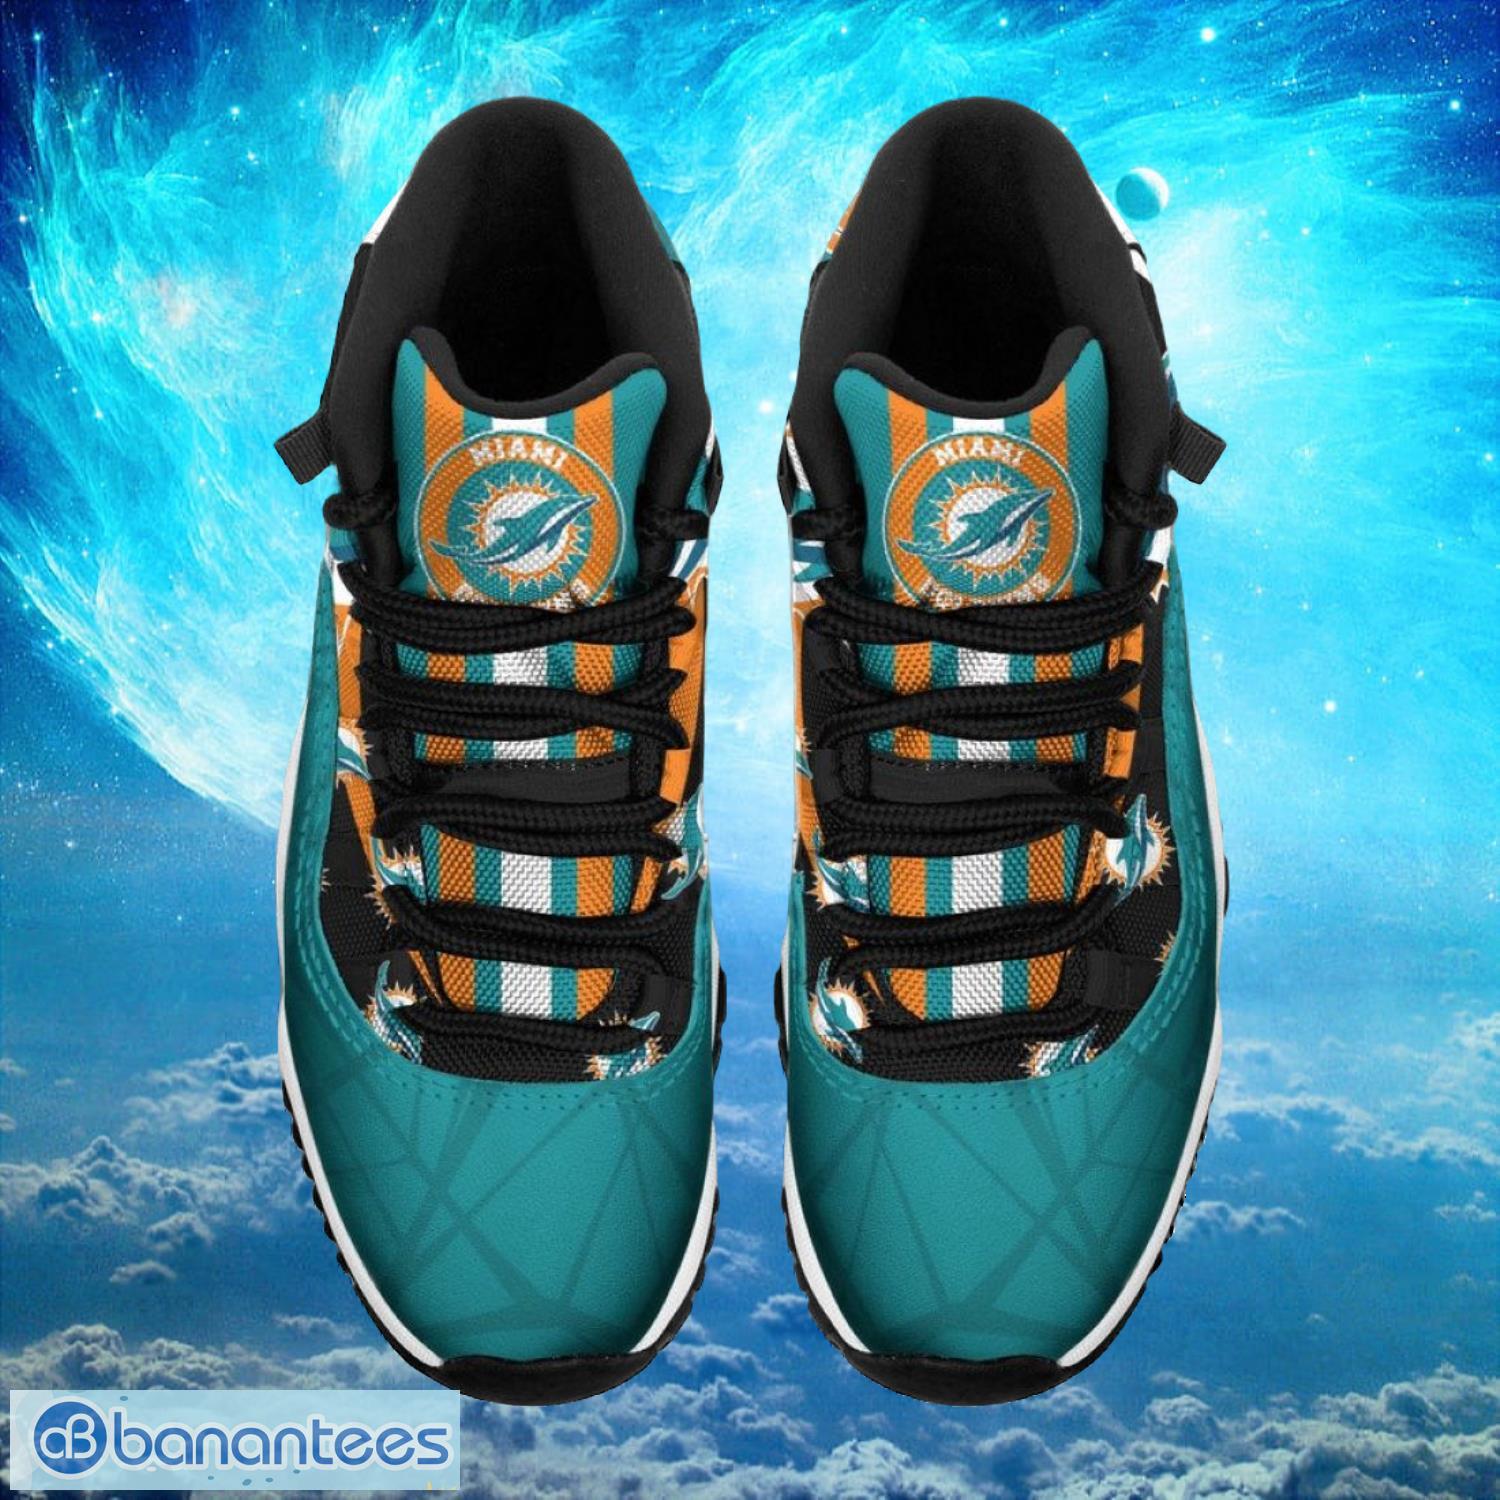 Miami Dolphins NFL Air Jordan 11 Sneakers Shoes Gift For Fans Product Photo 2